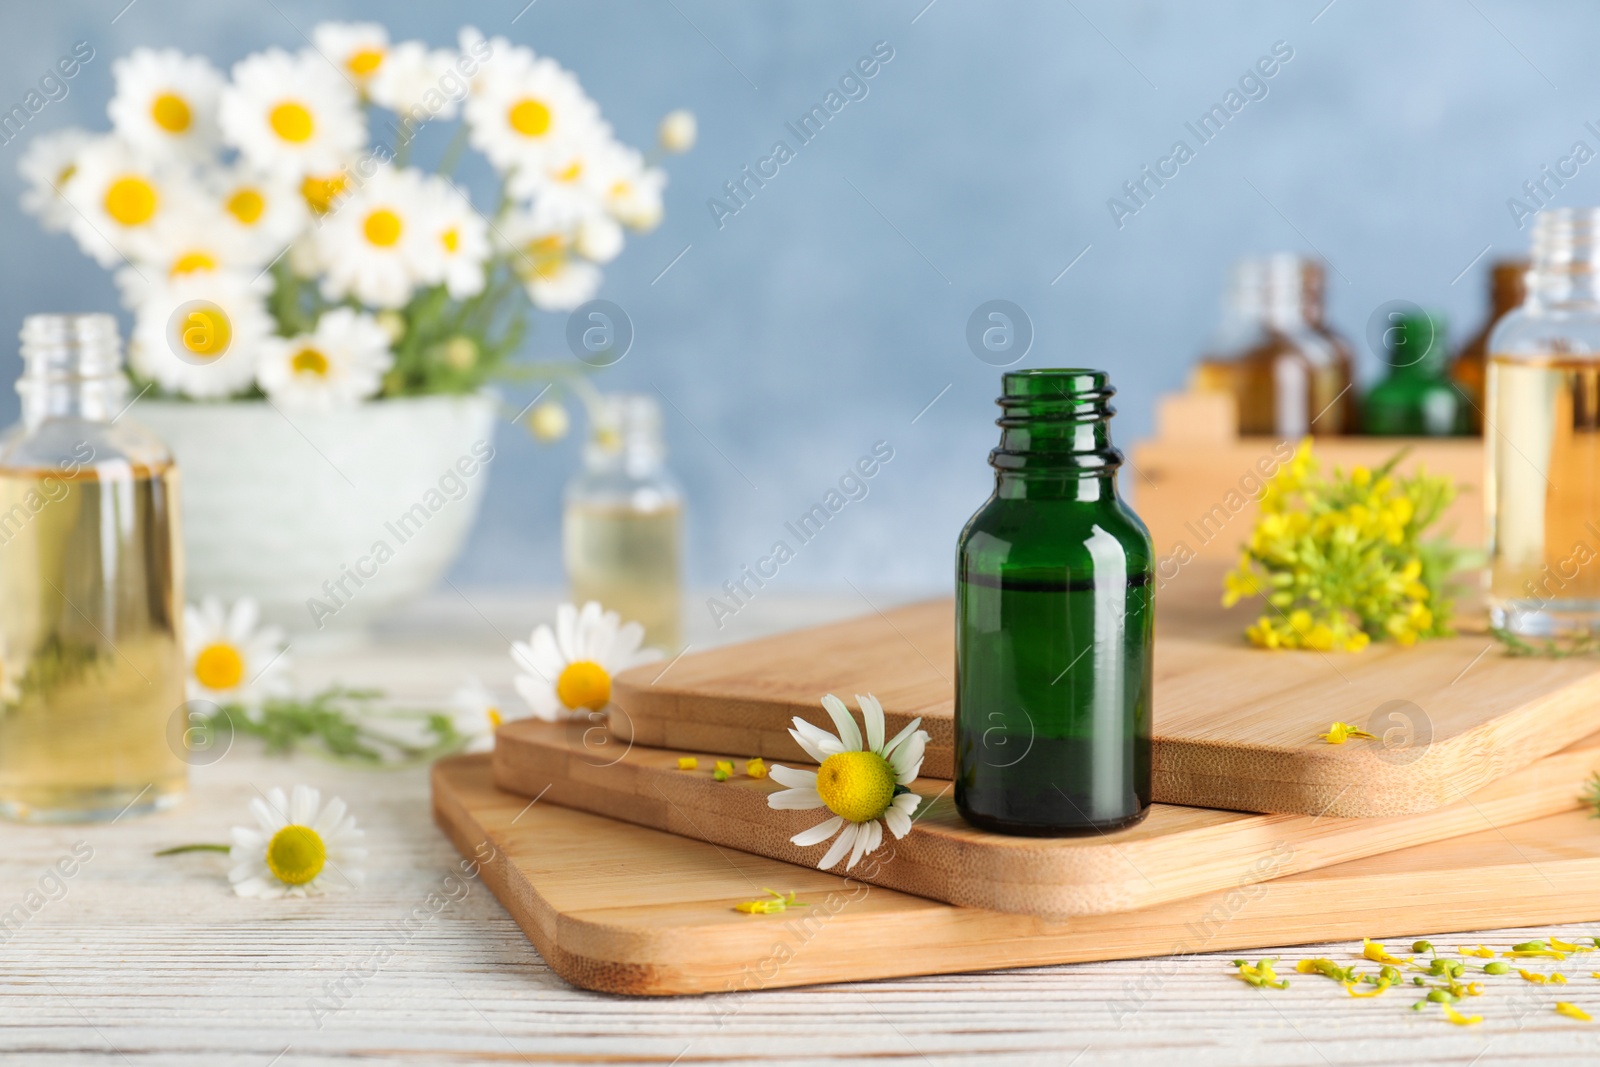 Photo of Bottle of essential oil and flowers on wooden table against color background, space for text